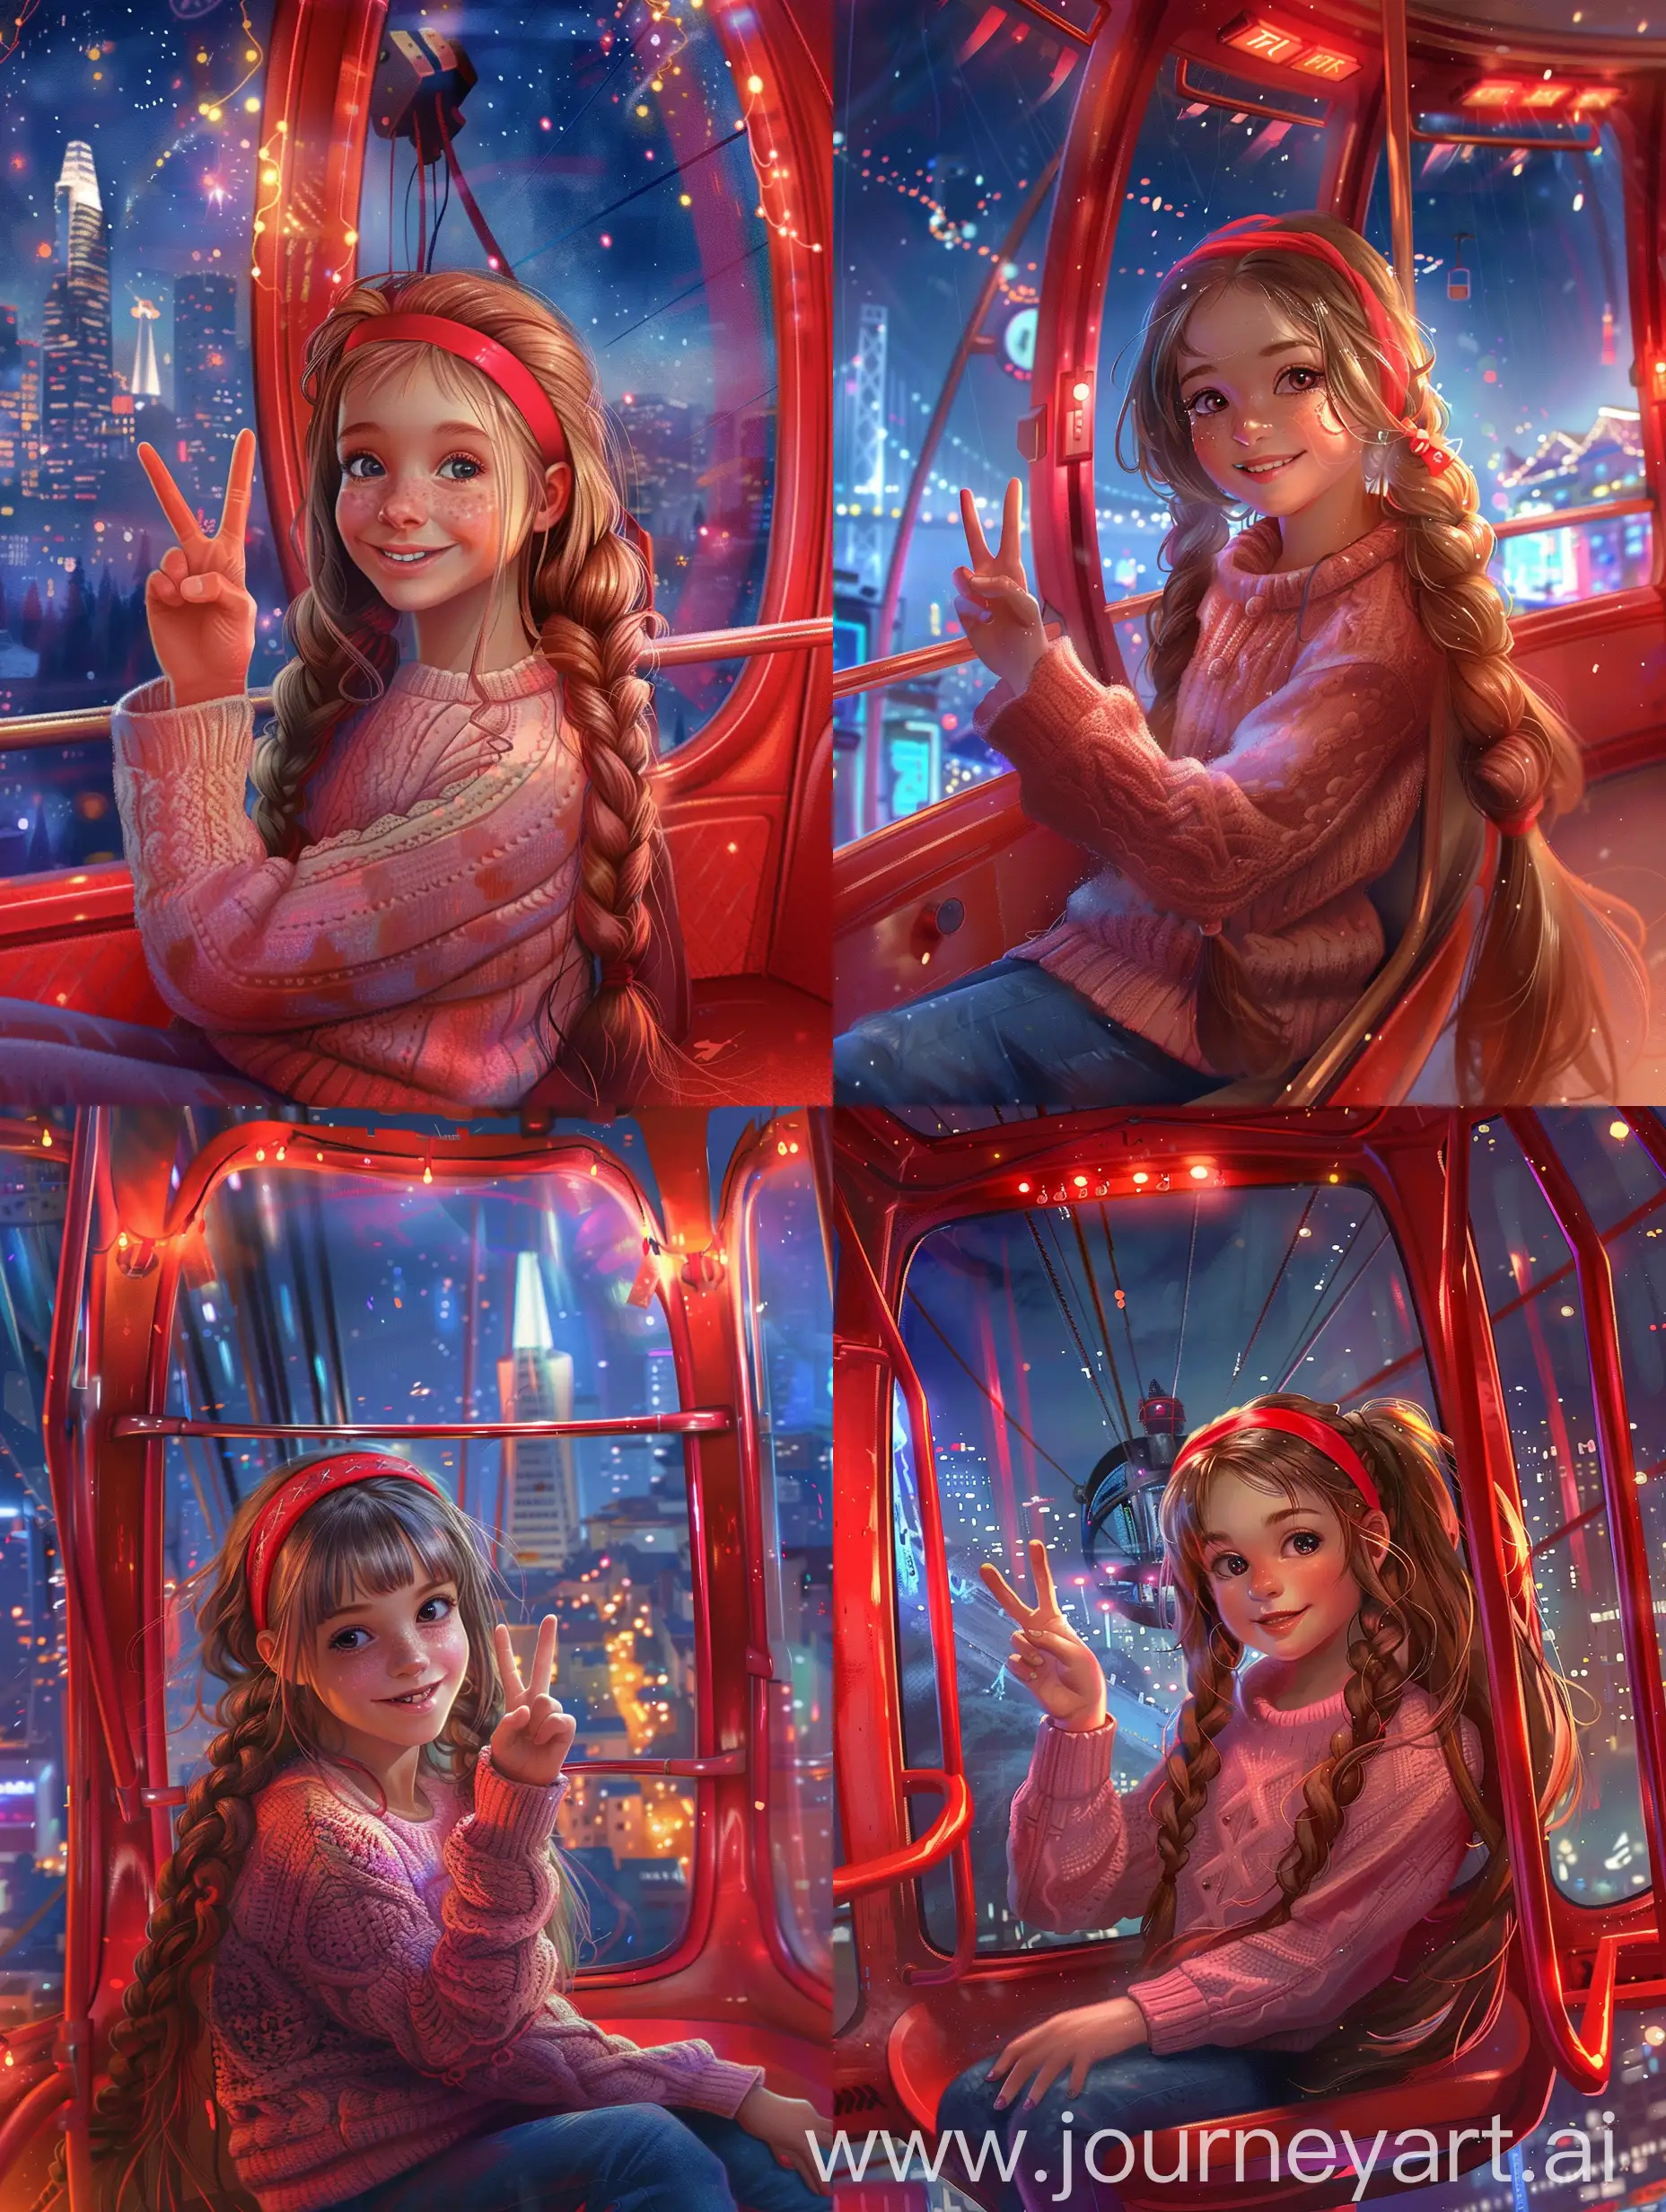 Create an image of a young girl with long, braided hair and a red hairband, wearing a pink sweater and sitting inside a brightly lit cable car. The interior should have red accents and large windows showcasing the night cityscape with twinkling lights in the background. The girl is making a peace sign with her hand, smiling, and appears to be enjoying a fun ride in the cable car